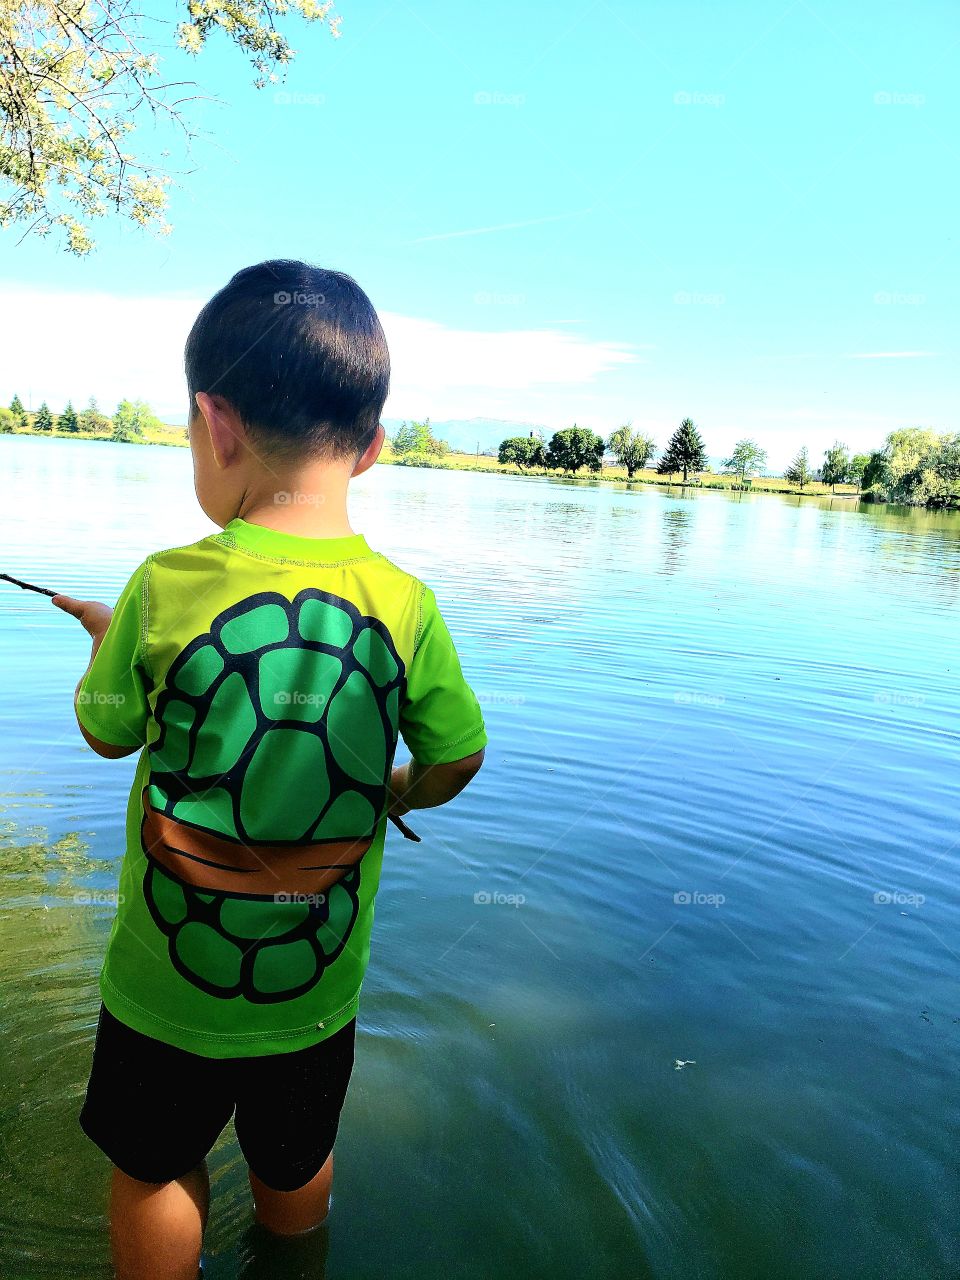 Summer would not be complete without going fishing at our local lake. My son plays in the water while I fish. It's one of our favorite things to do in the summer.